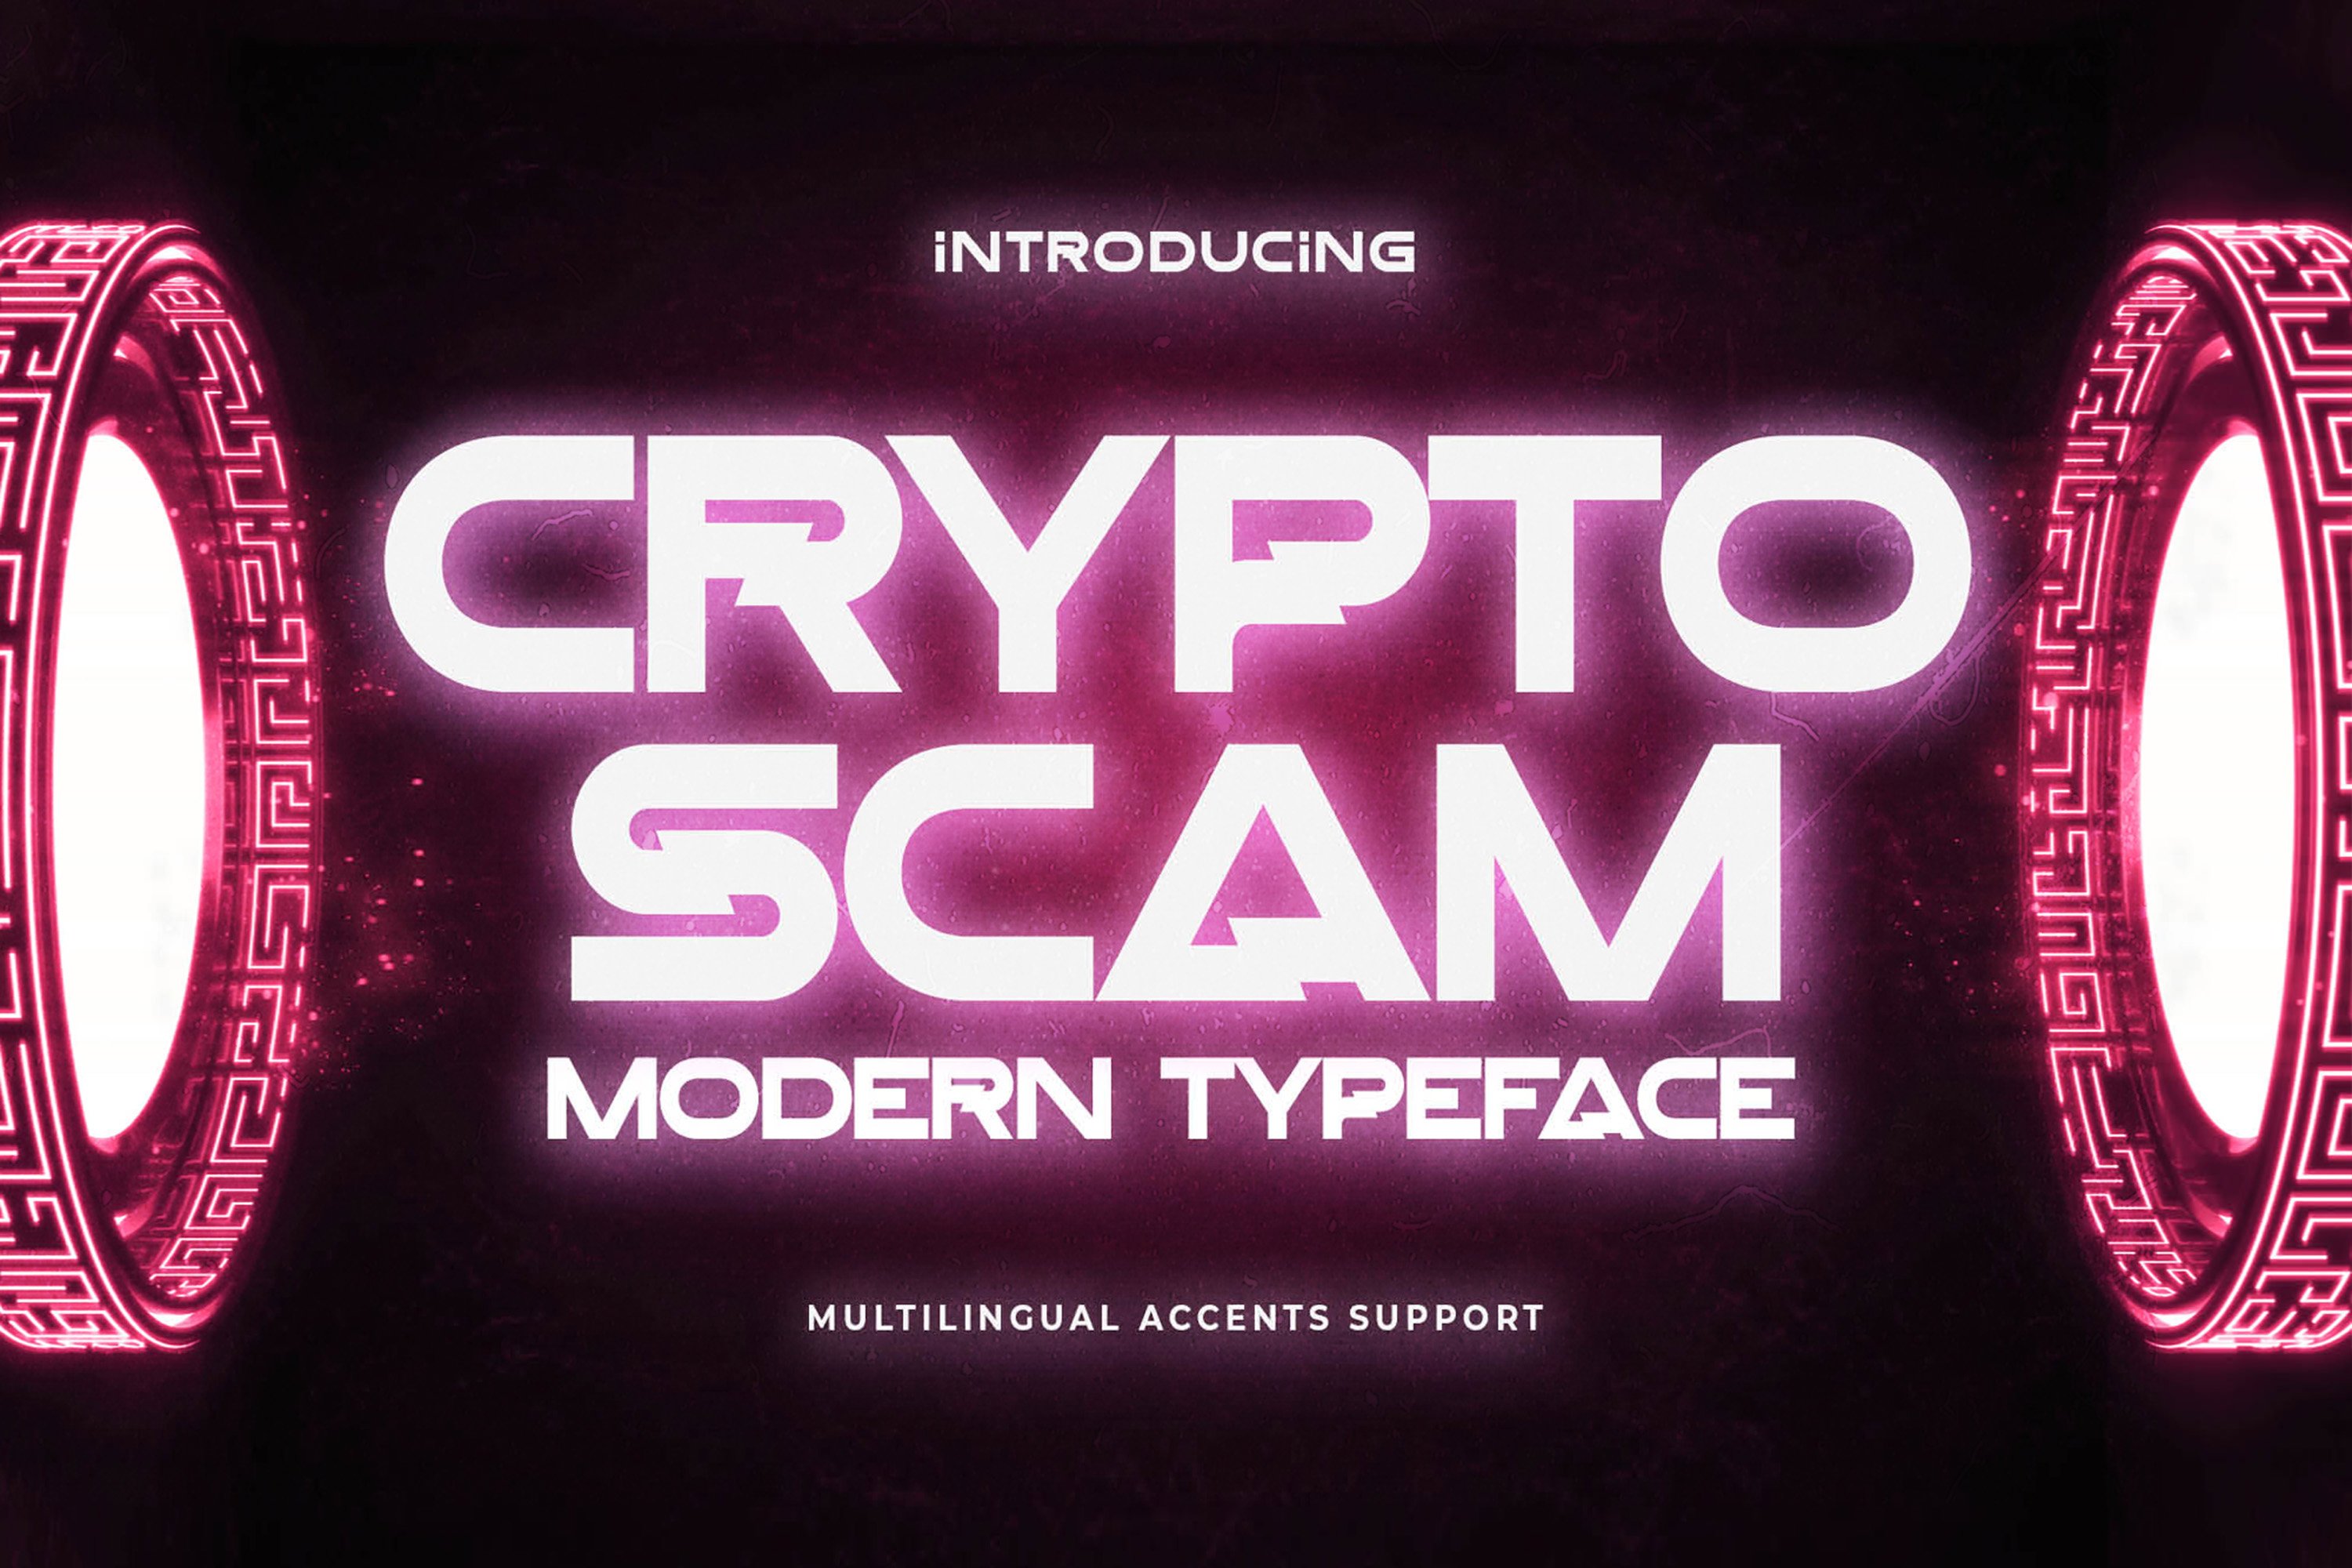 Crypto Scam - Modern Typeface cover image.